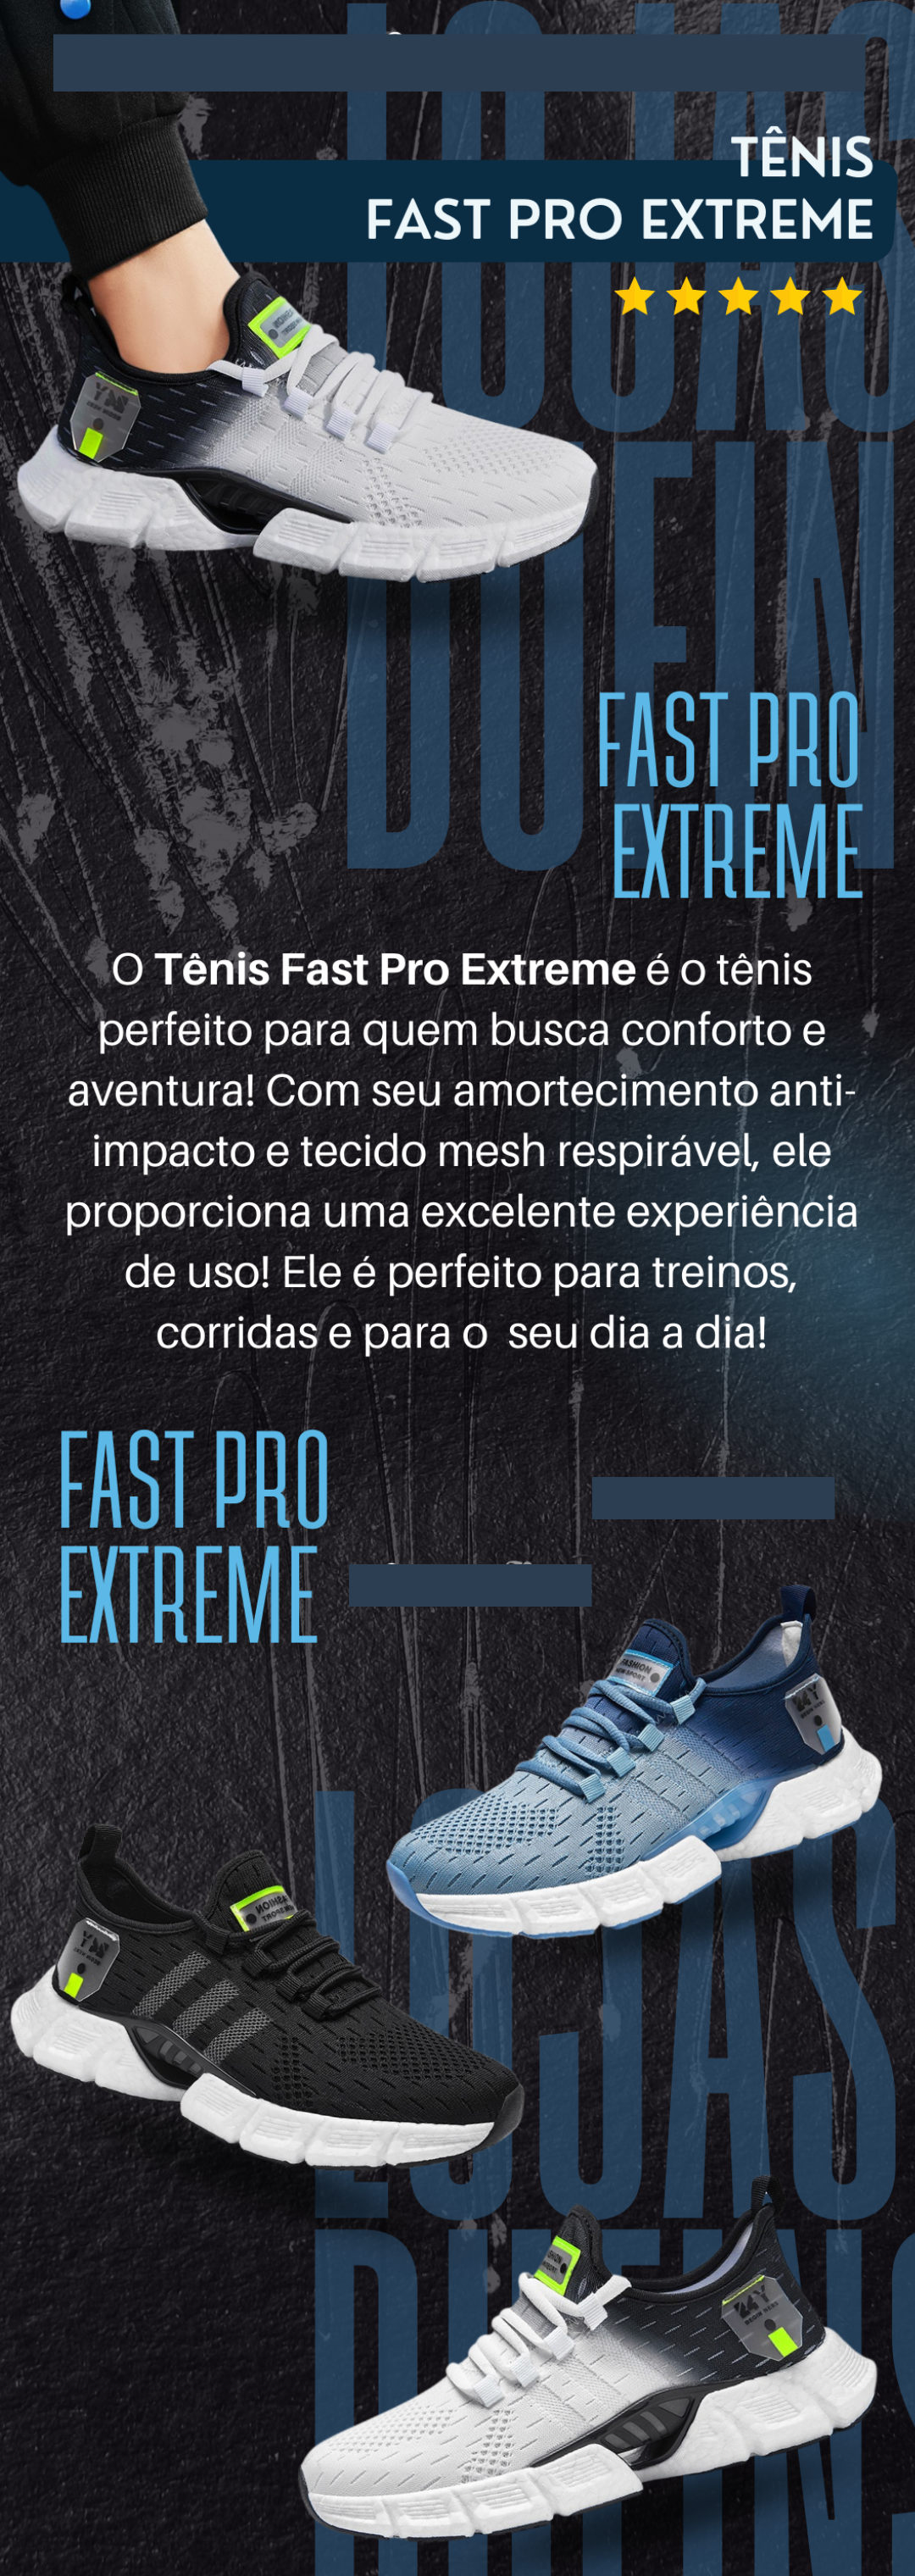 Tênis Fast Pro Extreme - Andreoli Store